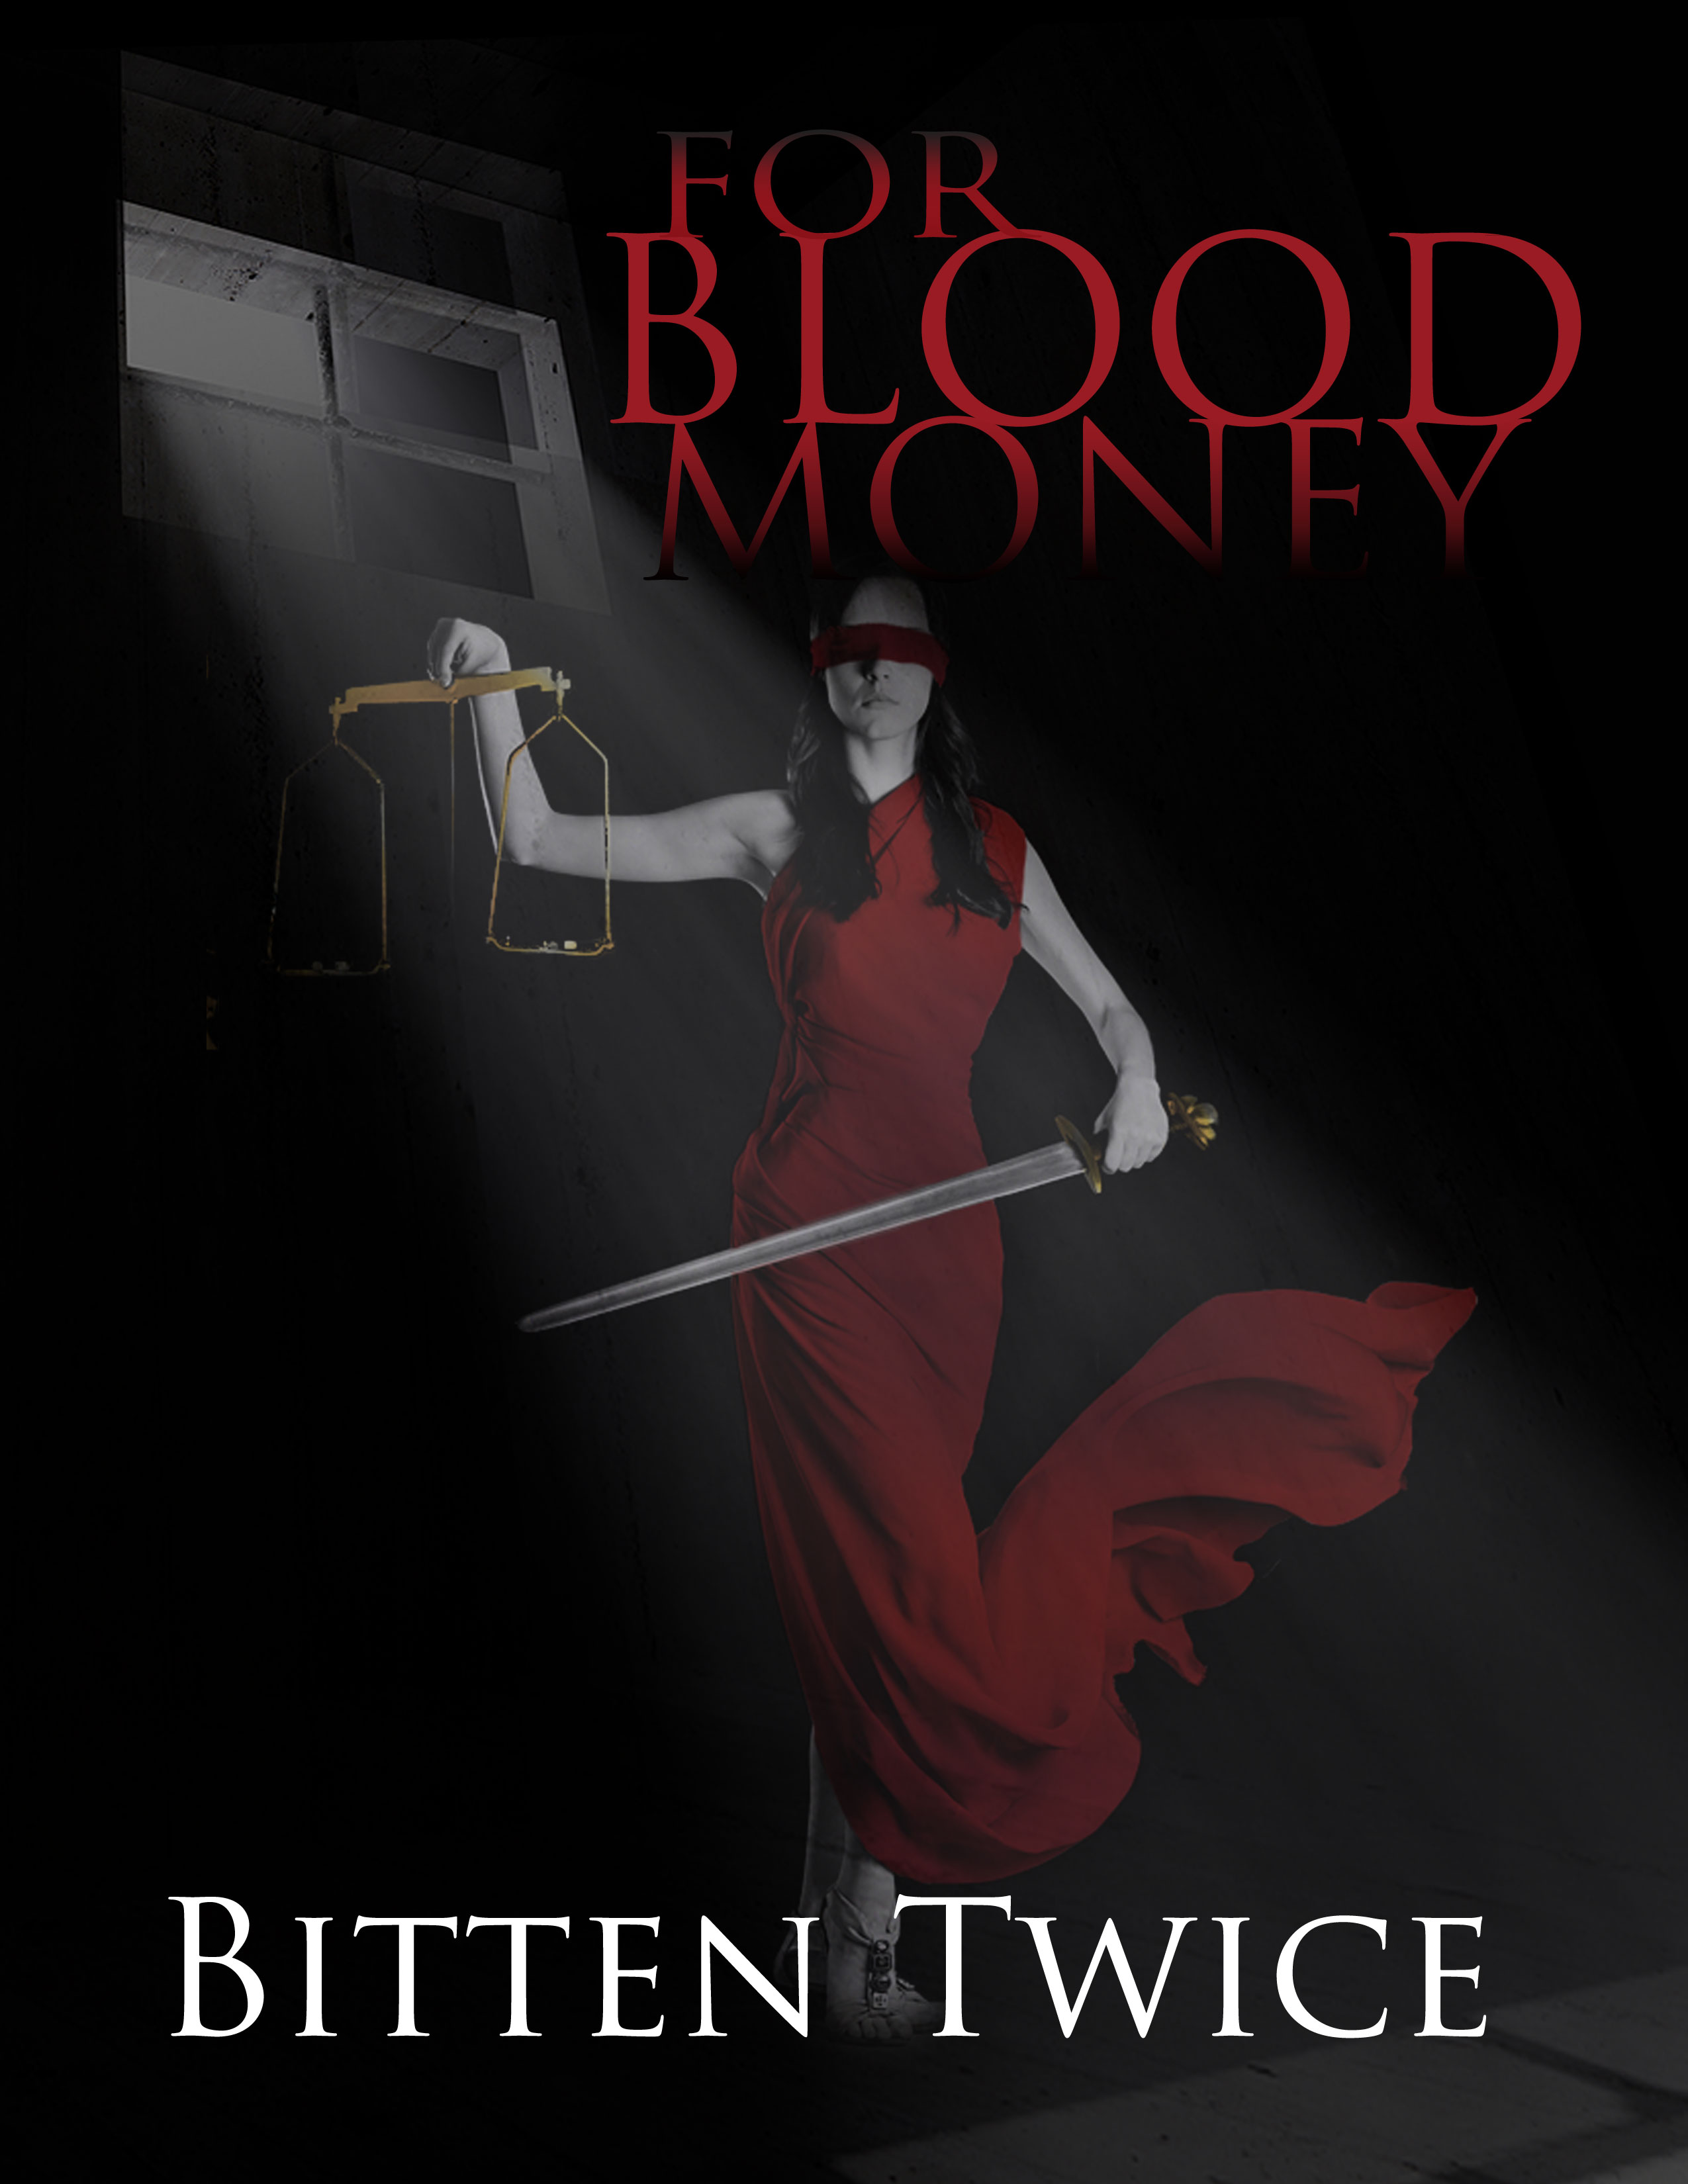 bookcover image shows lady justice wielding scales and a sword dressed in a red dress with a red blindfold; her dress moves in a wind but she is standing in a dark room highlighted by rays of a light shining through a small window